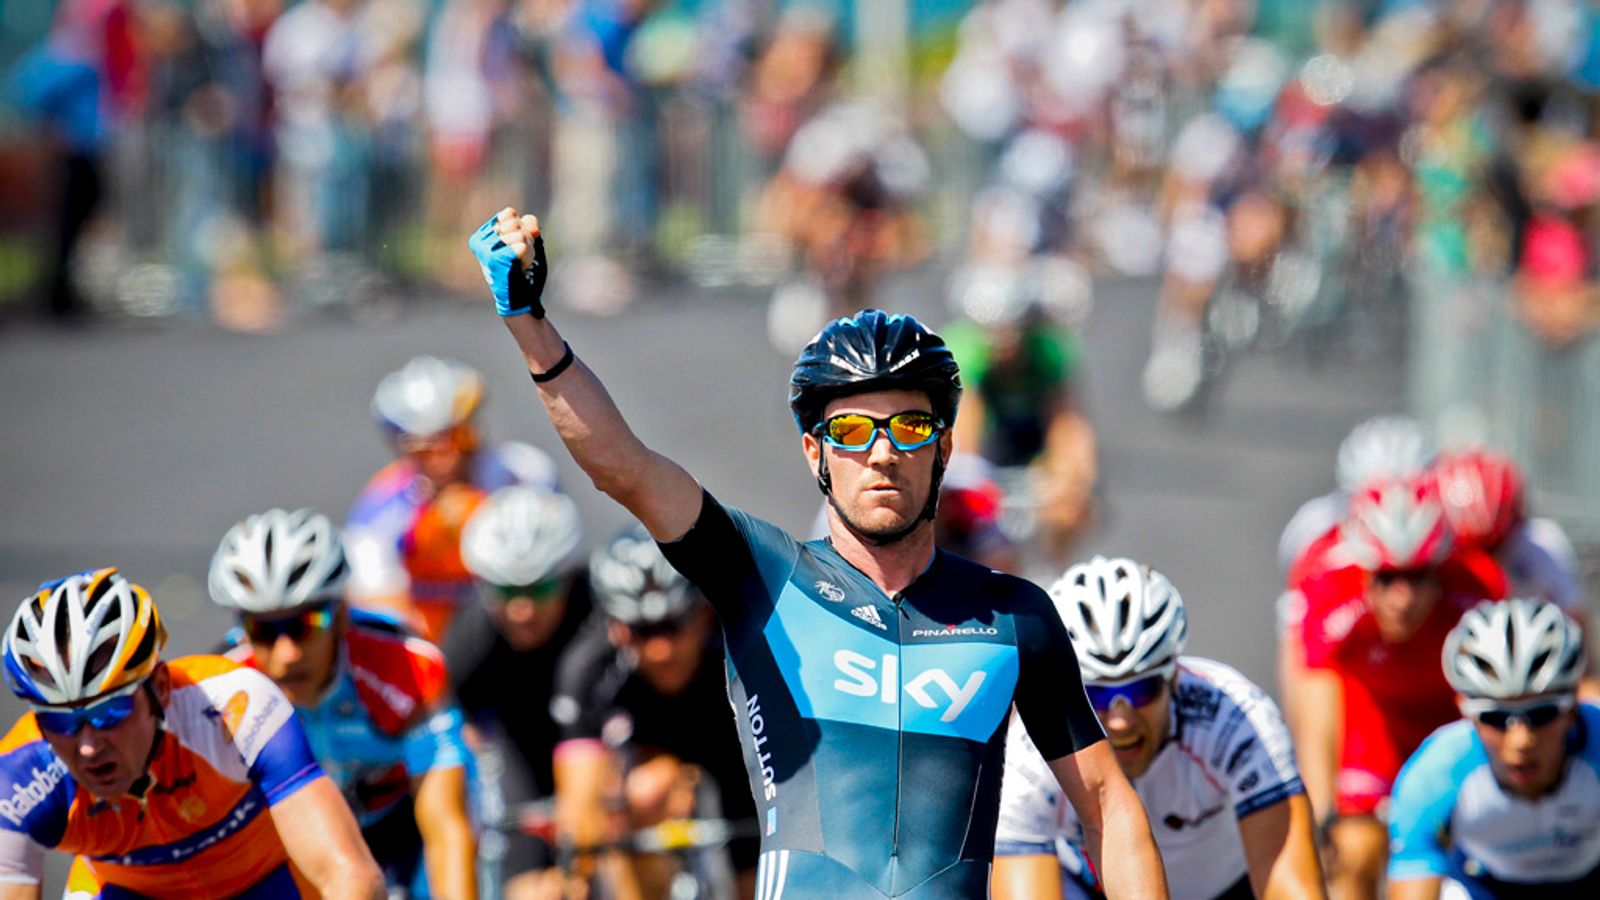 Sutton on form in NSW | Cycling News | Sky Sports